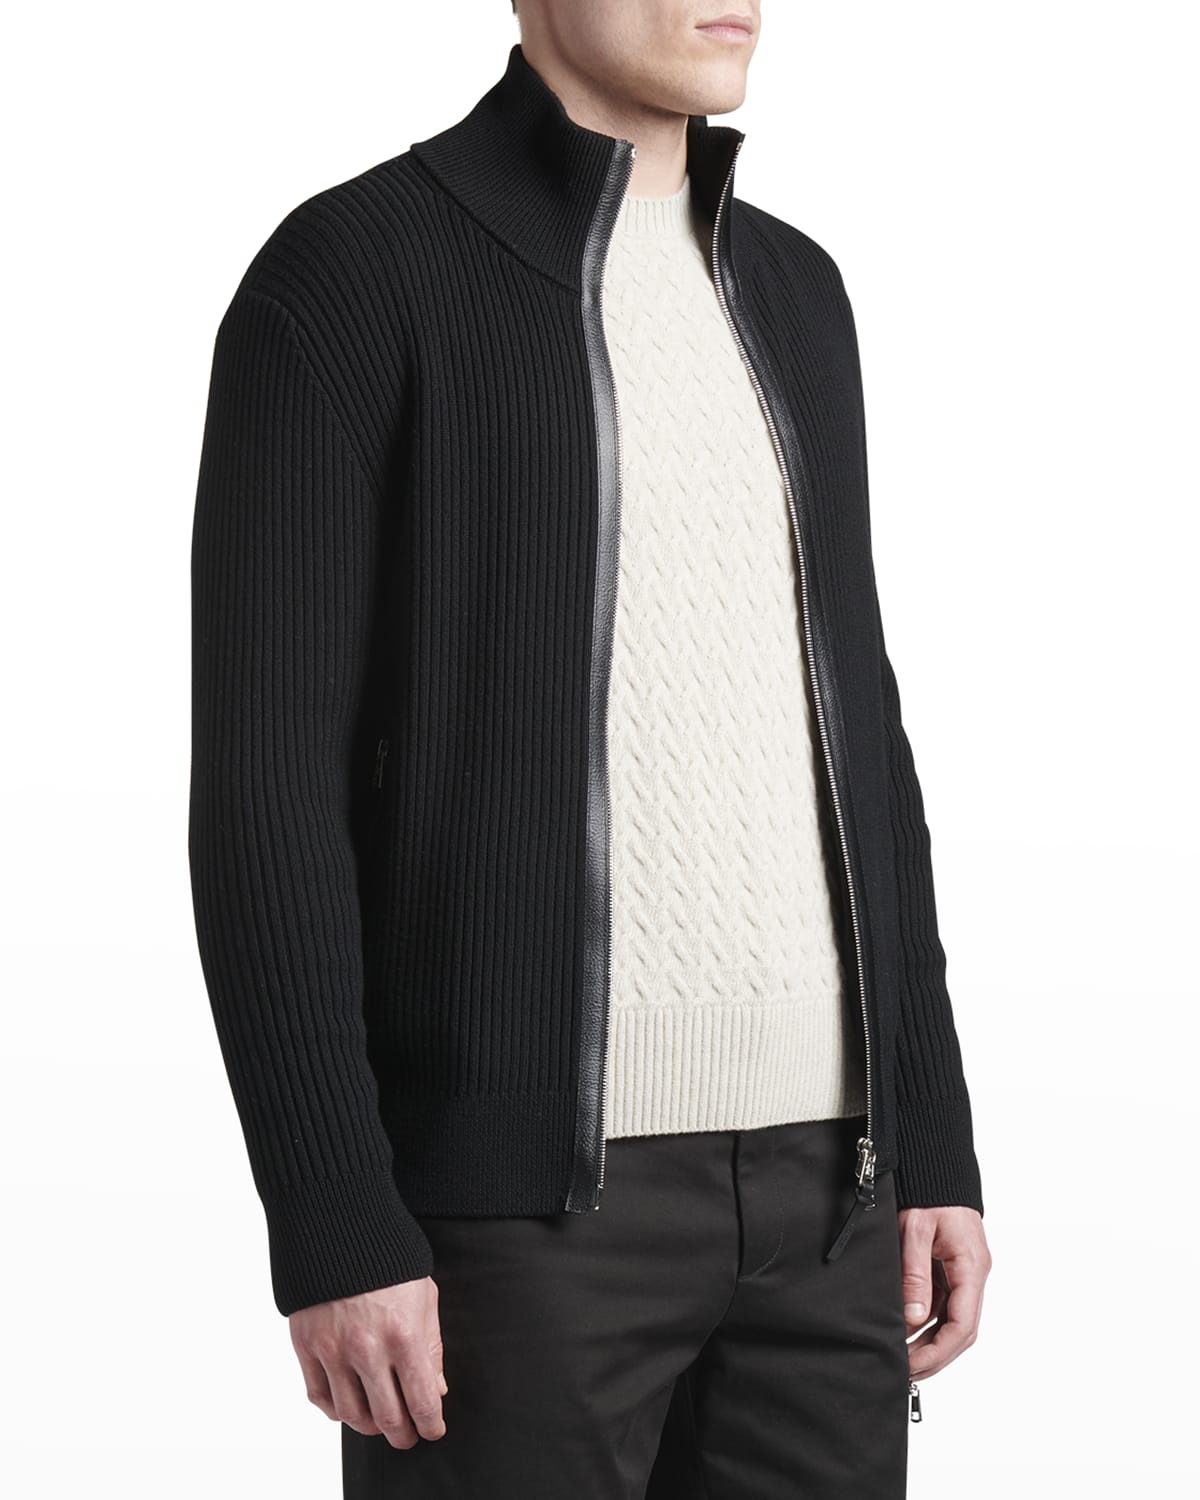 Moncler Men's Ribbed Cardigan with Leather Trim | Neiman Marcus